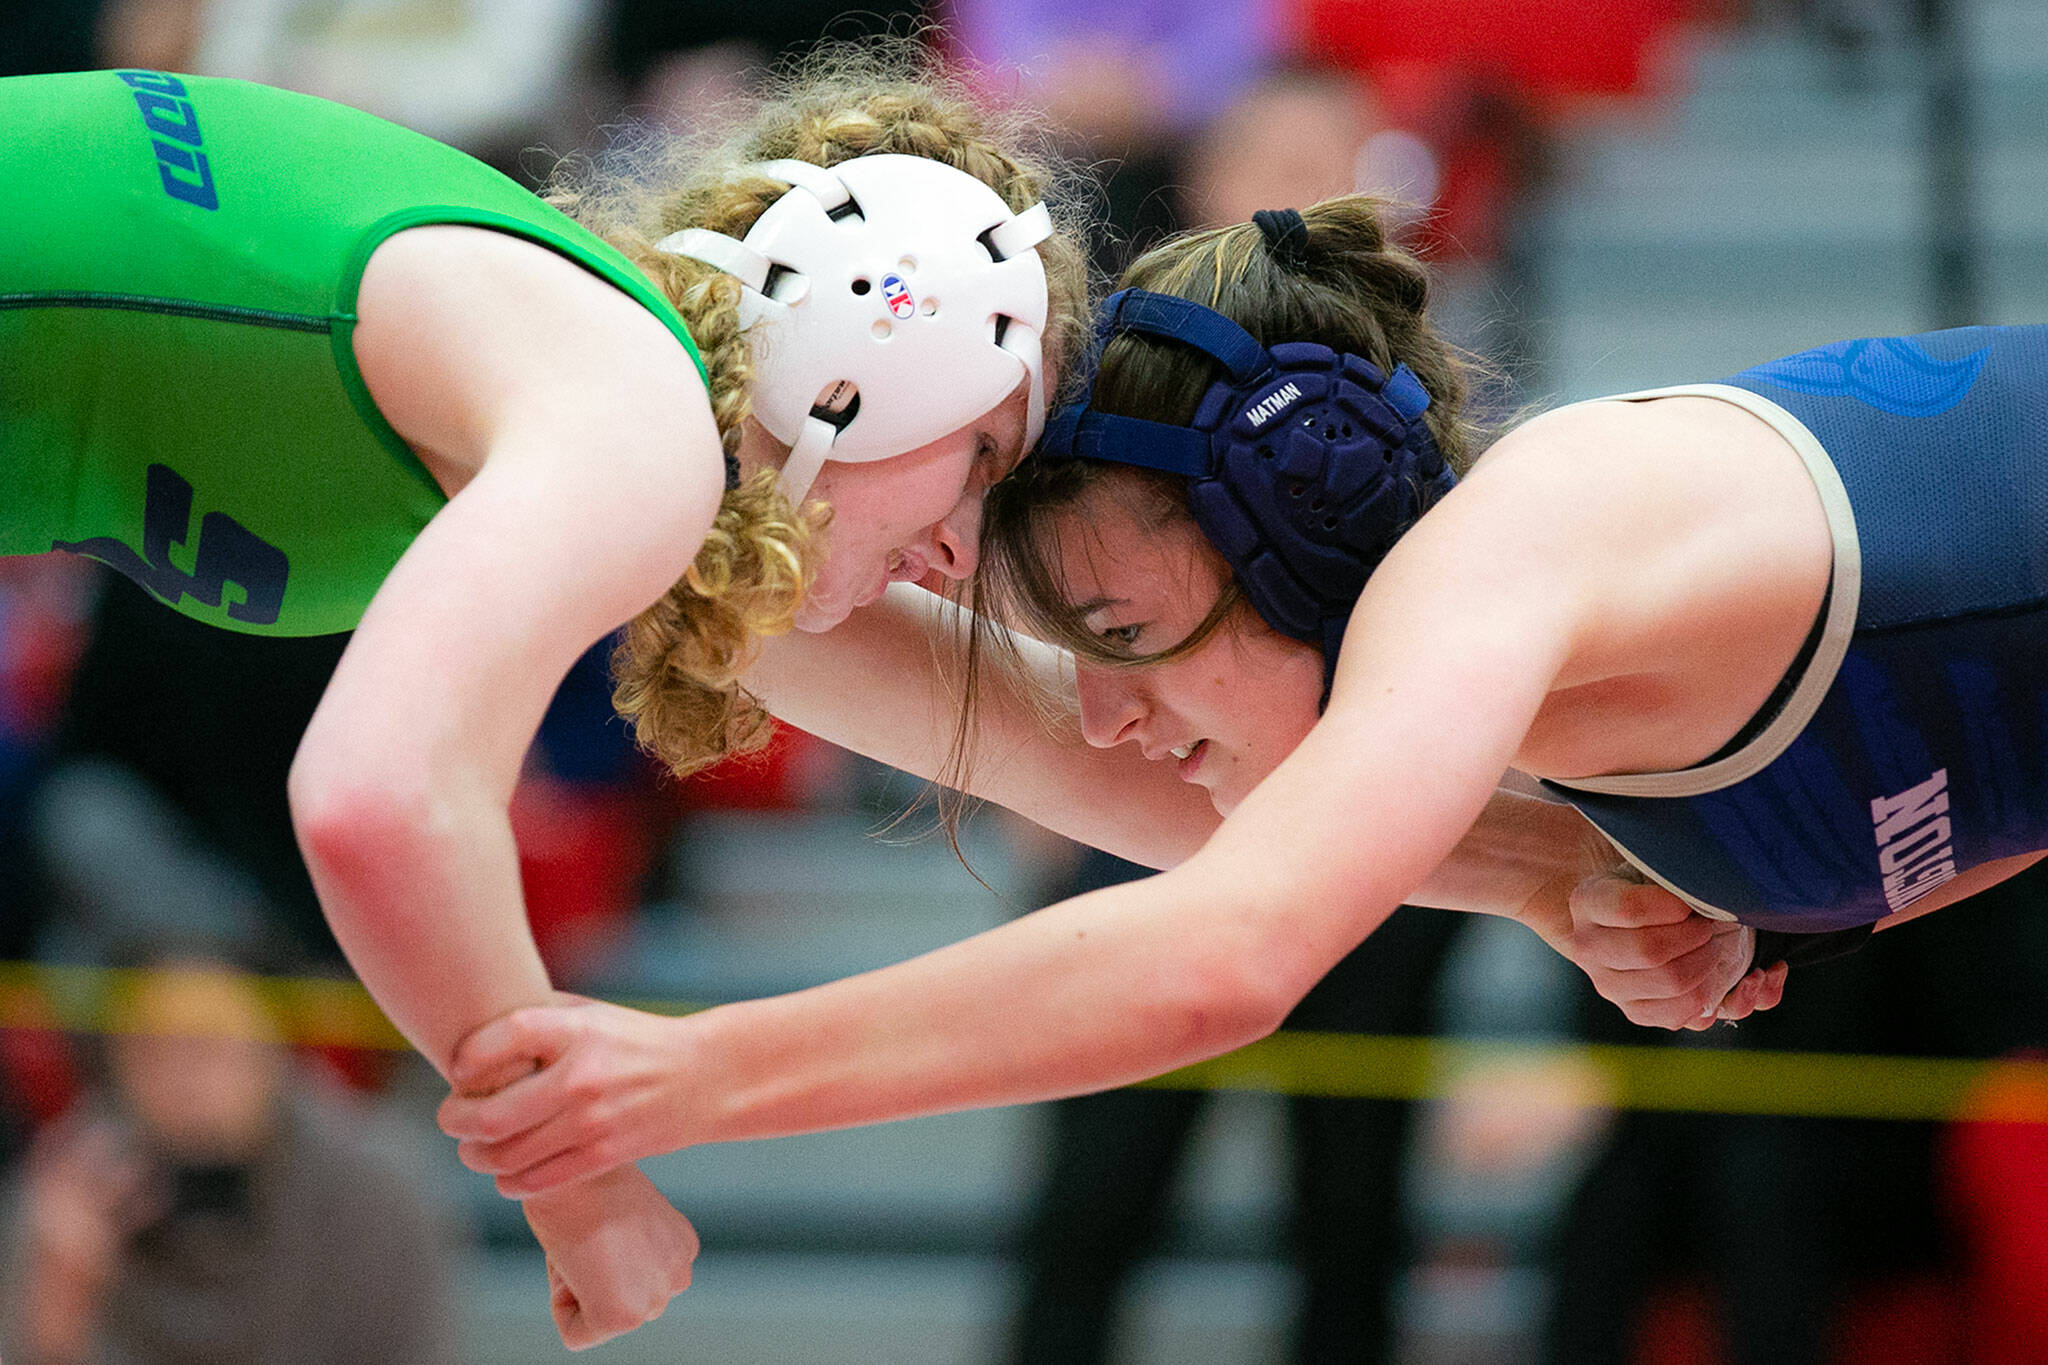 Shorewood’s Libby Norton and Arlington’s Araxi Crew grapple with each other during the 3A/4A Girls Region 1 tournament on Feb. 11, 2023, at Snohomish High School in Snohomish. (Ryan Berry / The Herald)